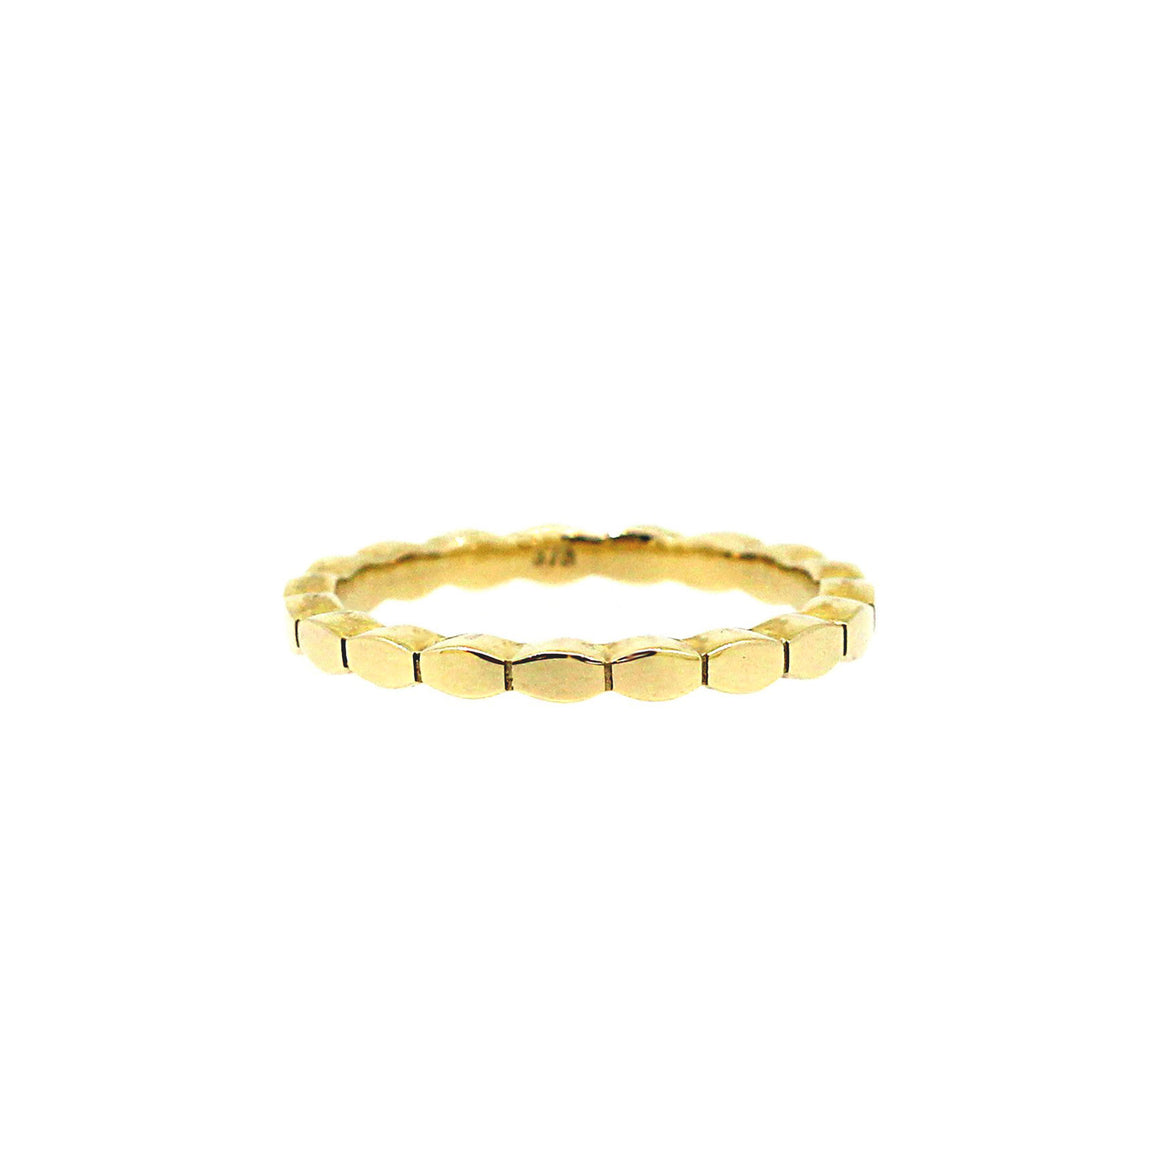 Bali gold stack ring. Perfect for stacking